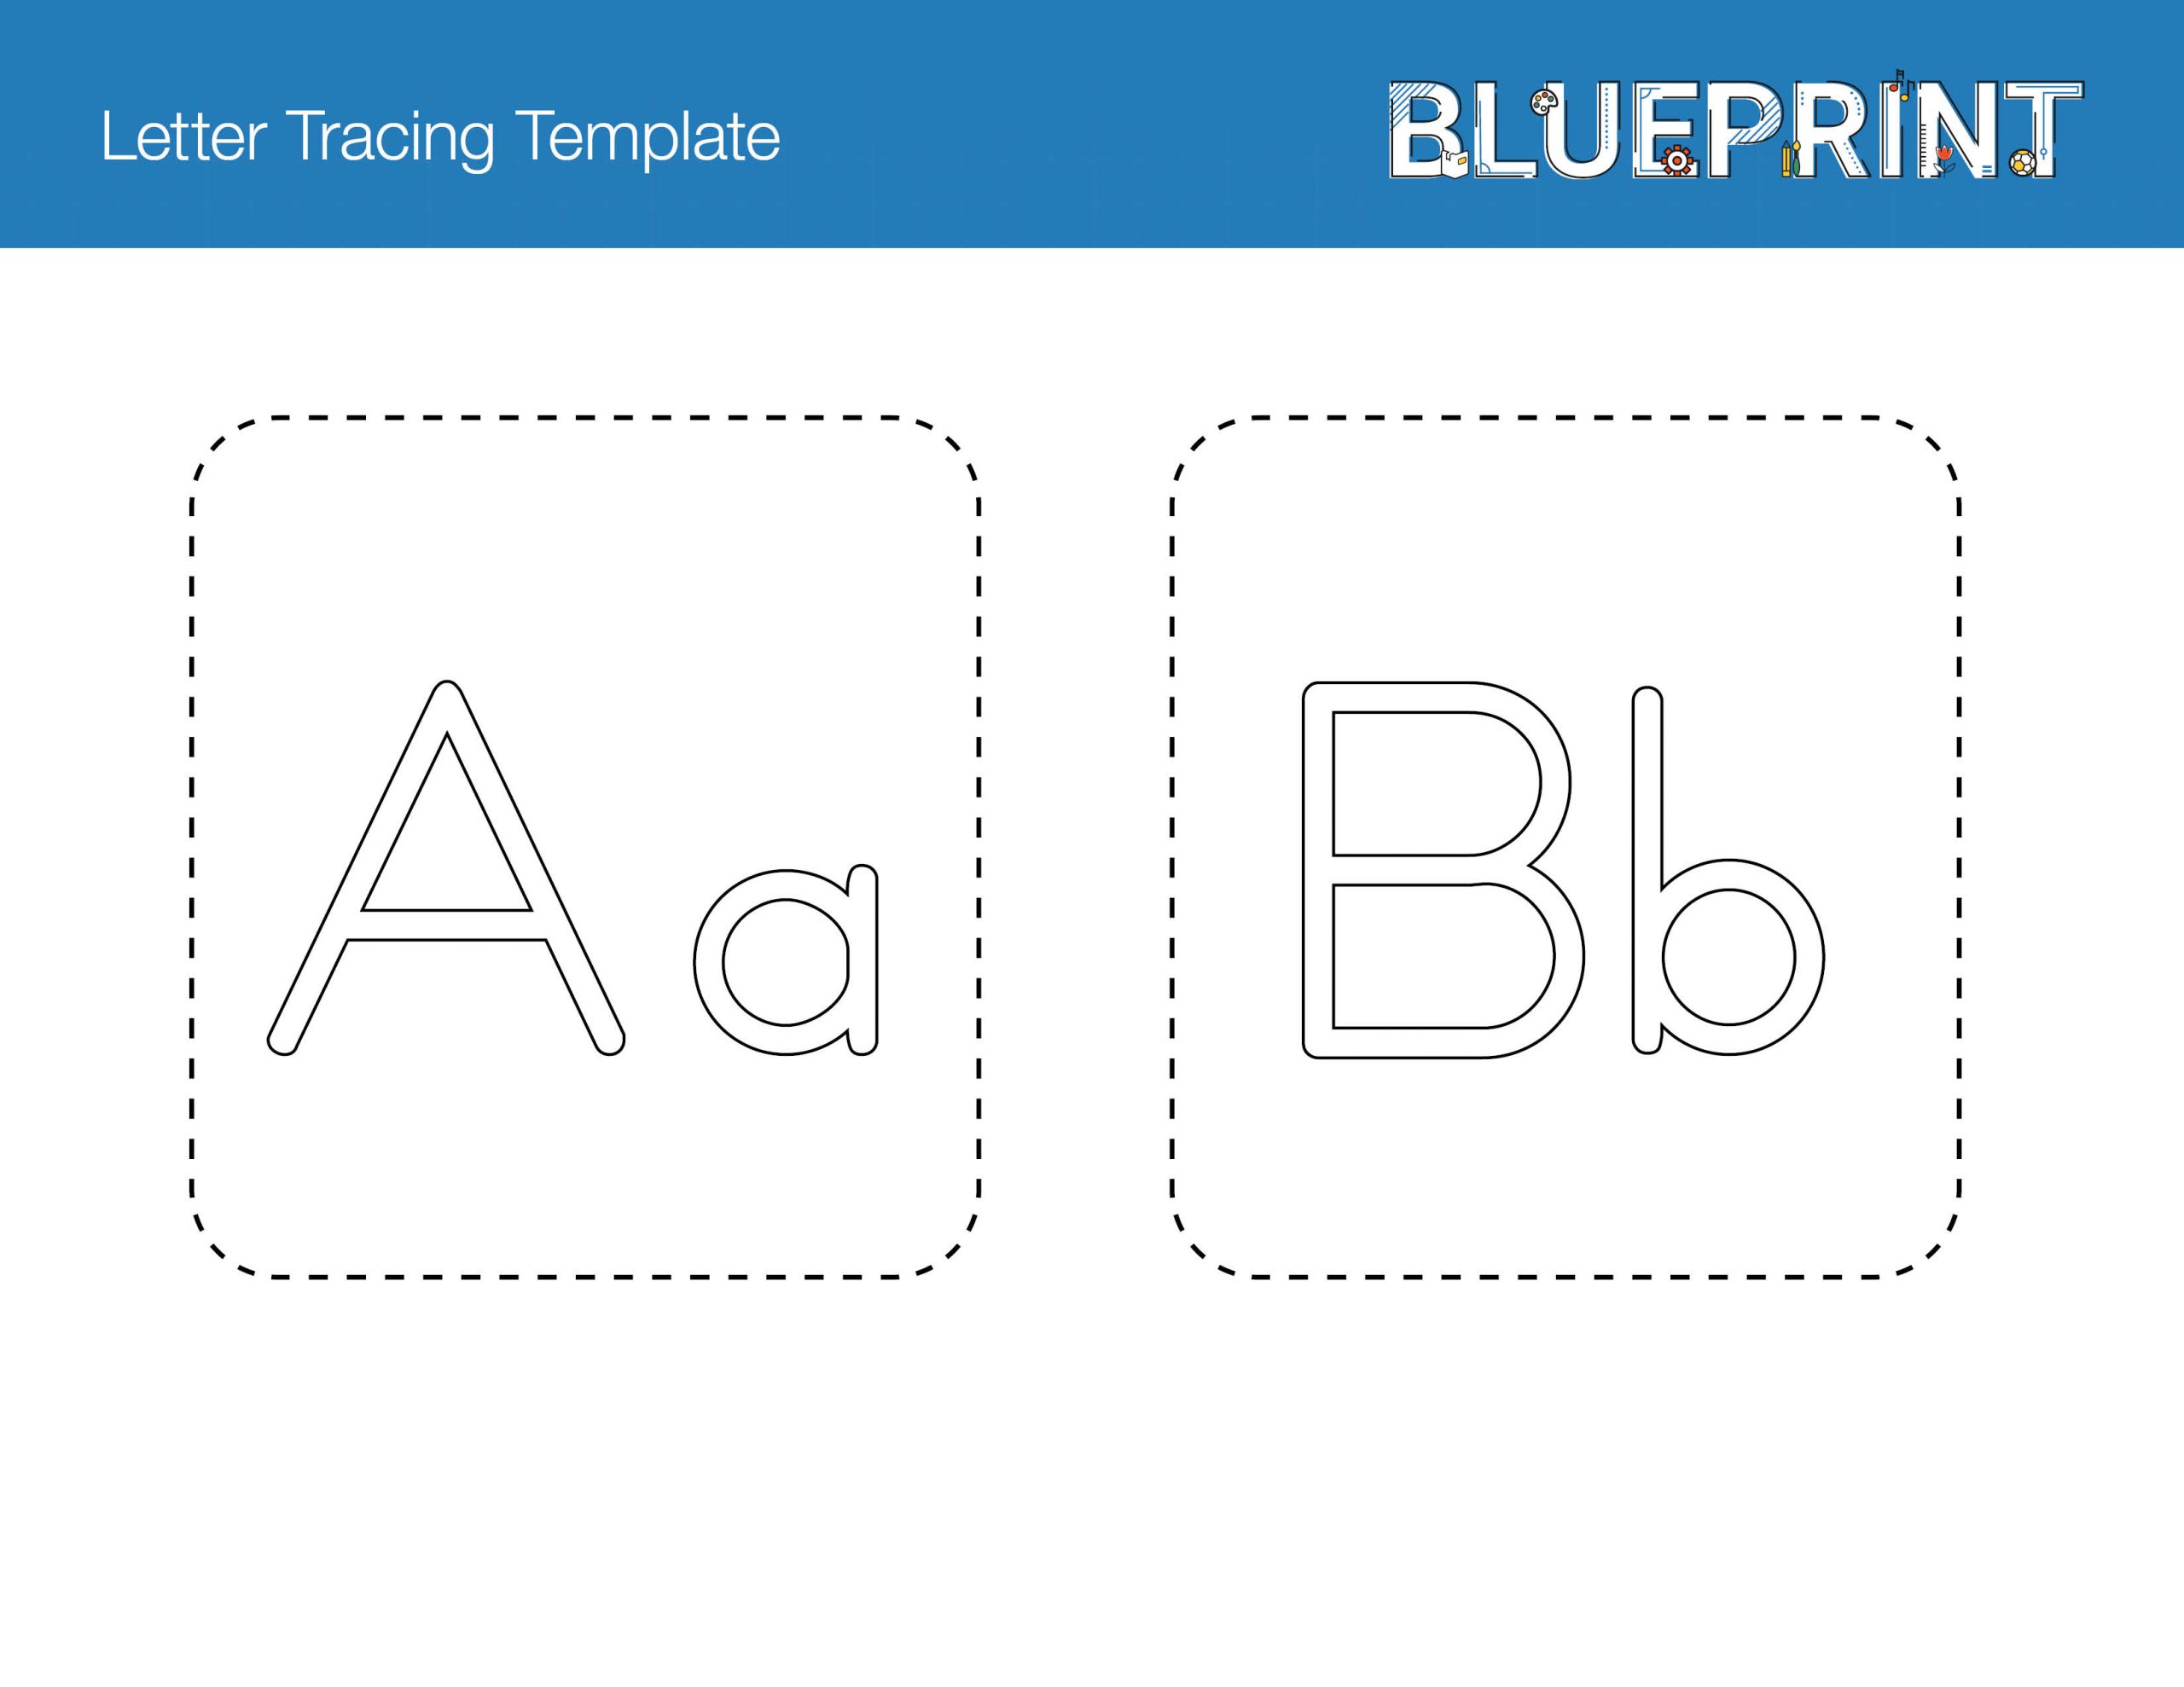 Letter Tracing Template